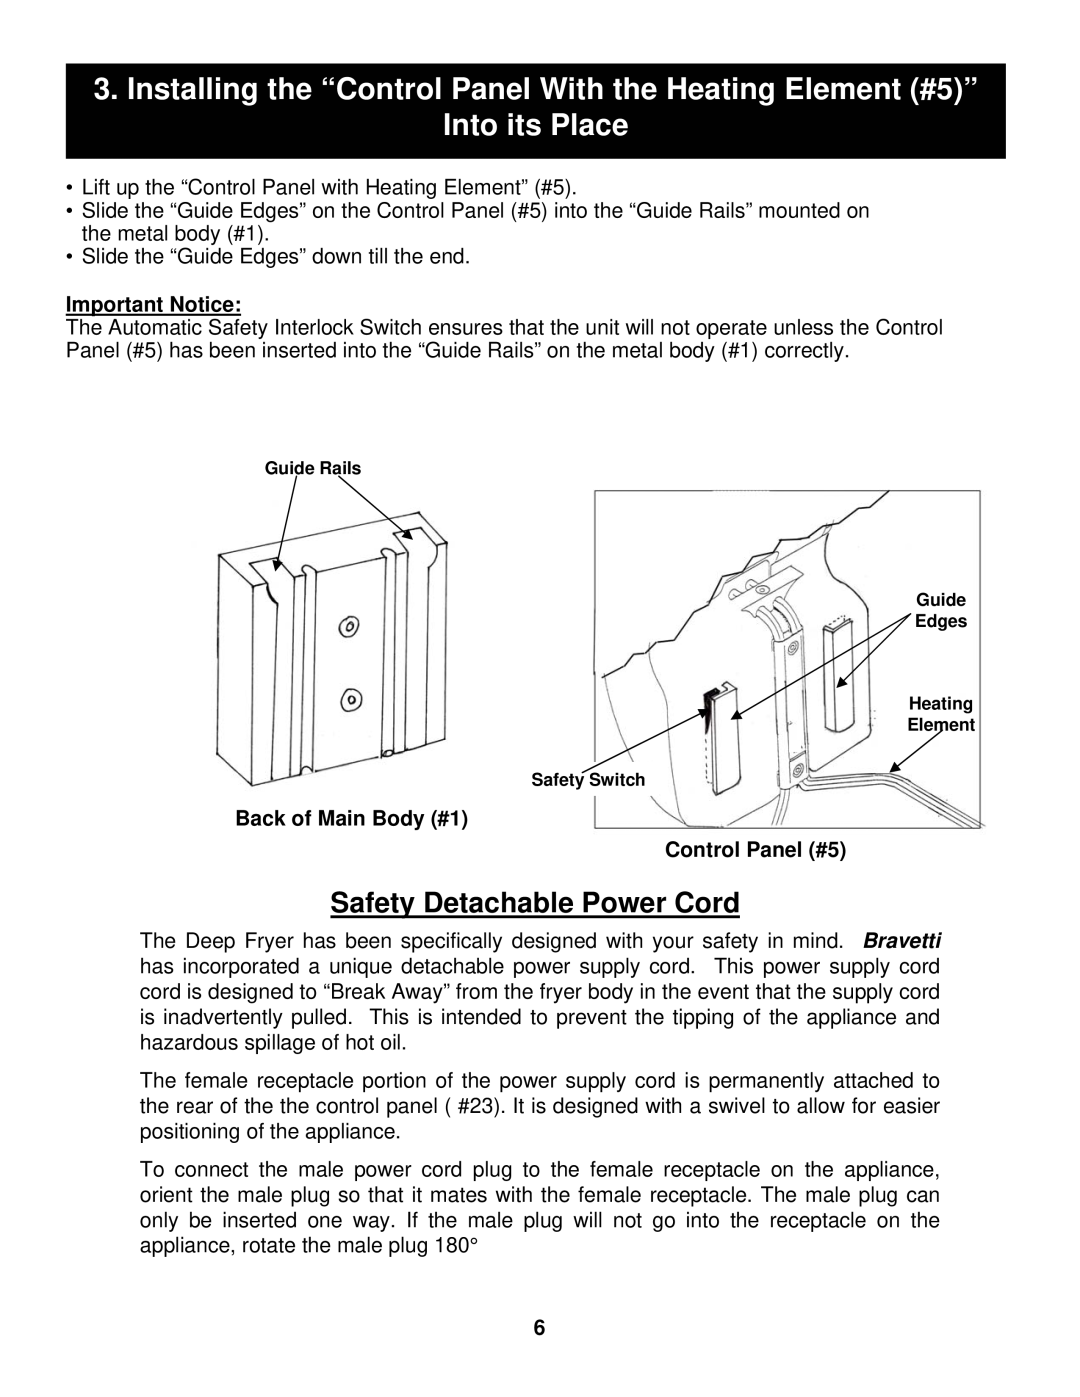 Euro-Pro BF160 manual Safety Detachable Power Cord, Important Notice, Back of Main Body #1 Control Panel #5 